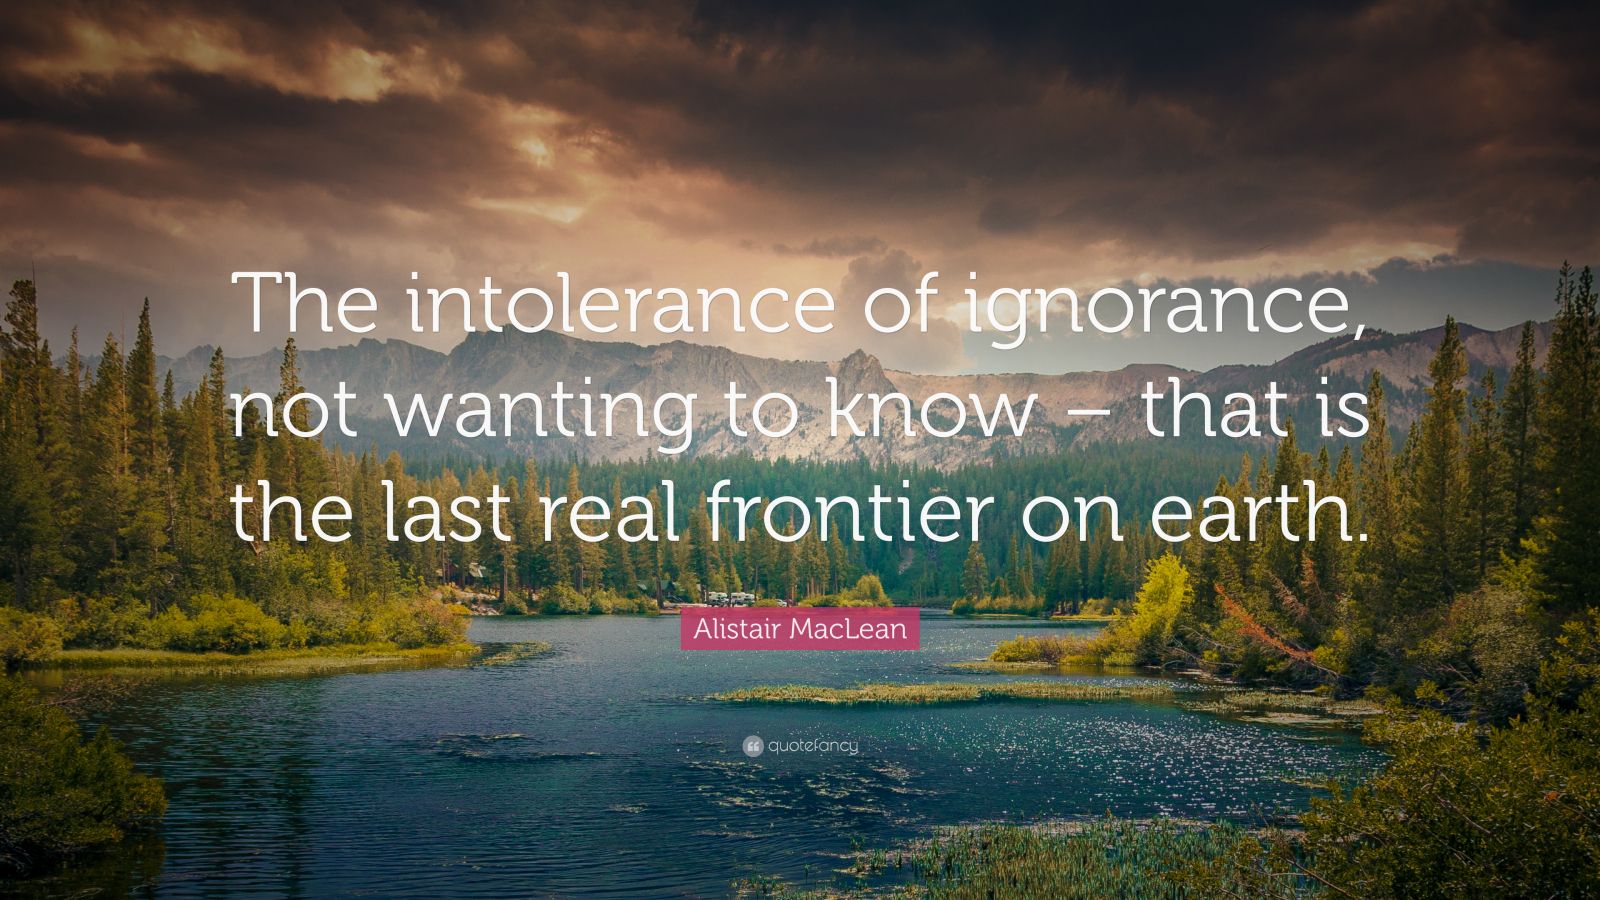 Alistair MacLean Quote: “The intolerance of ignorance, not wanting to ...